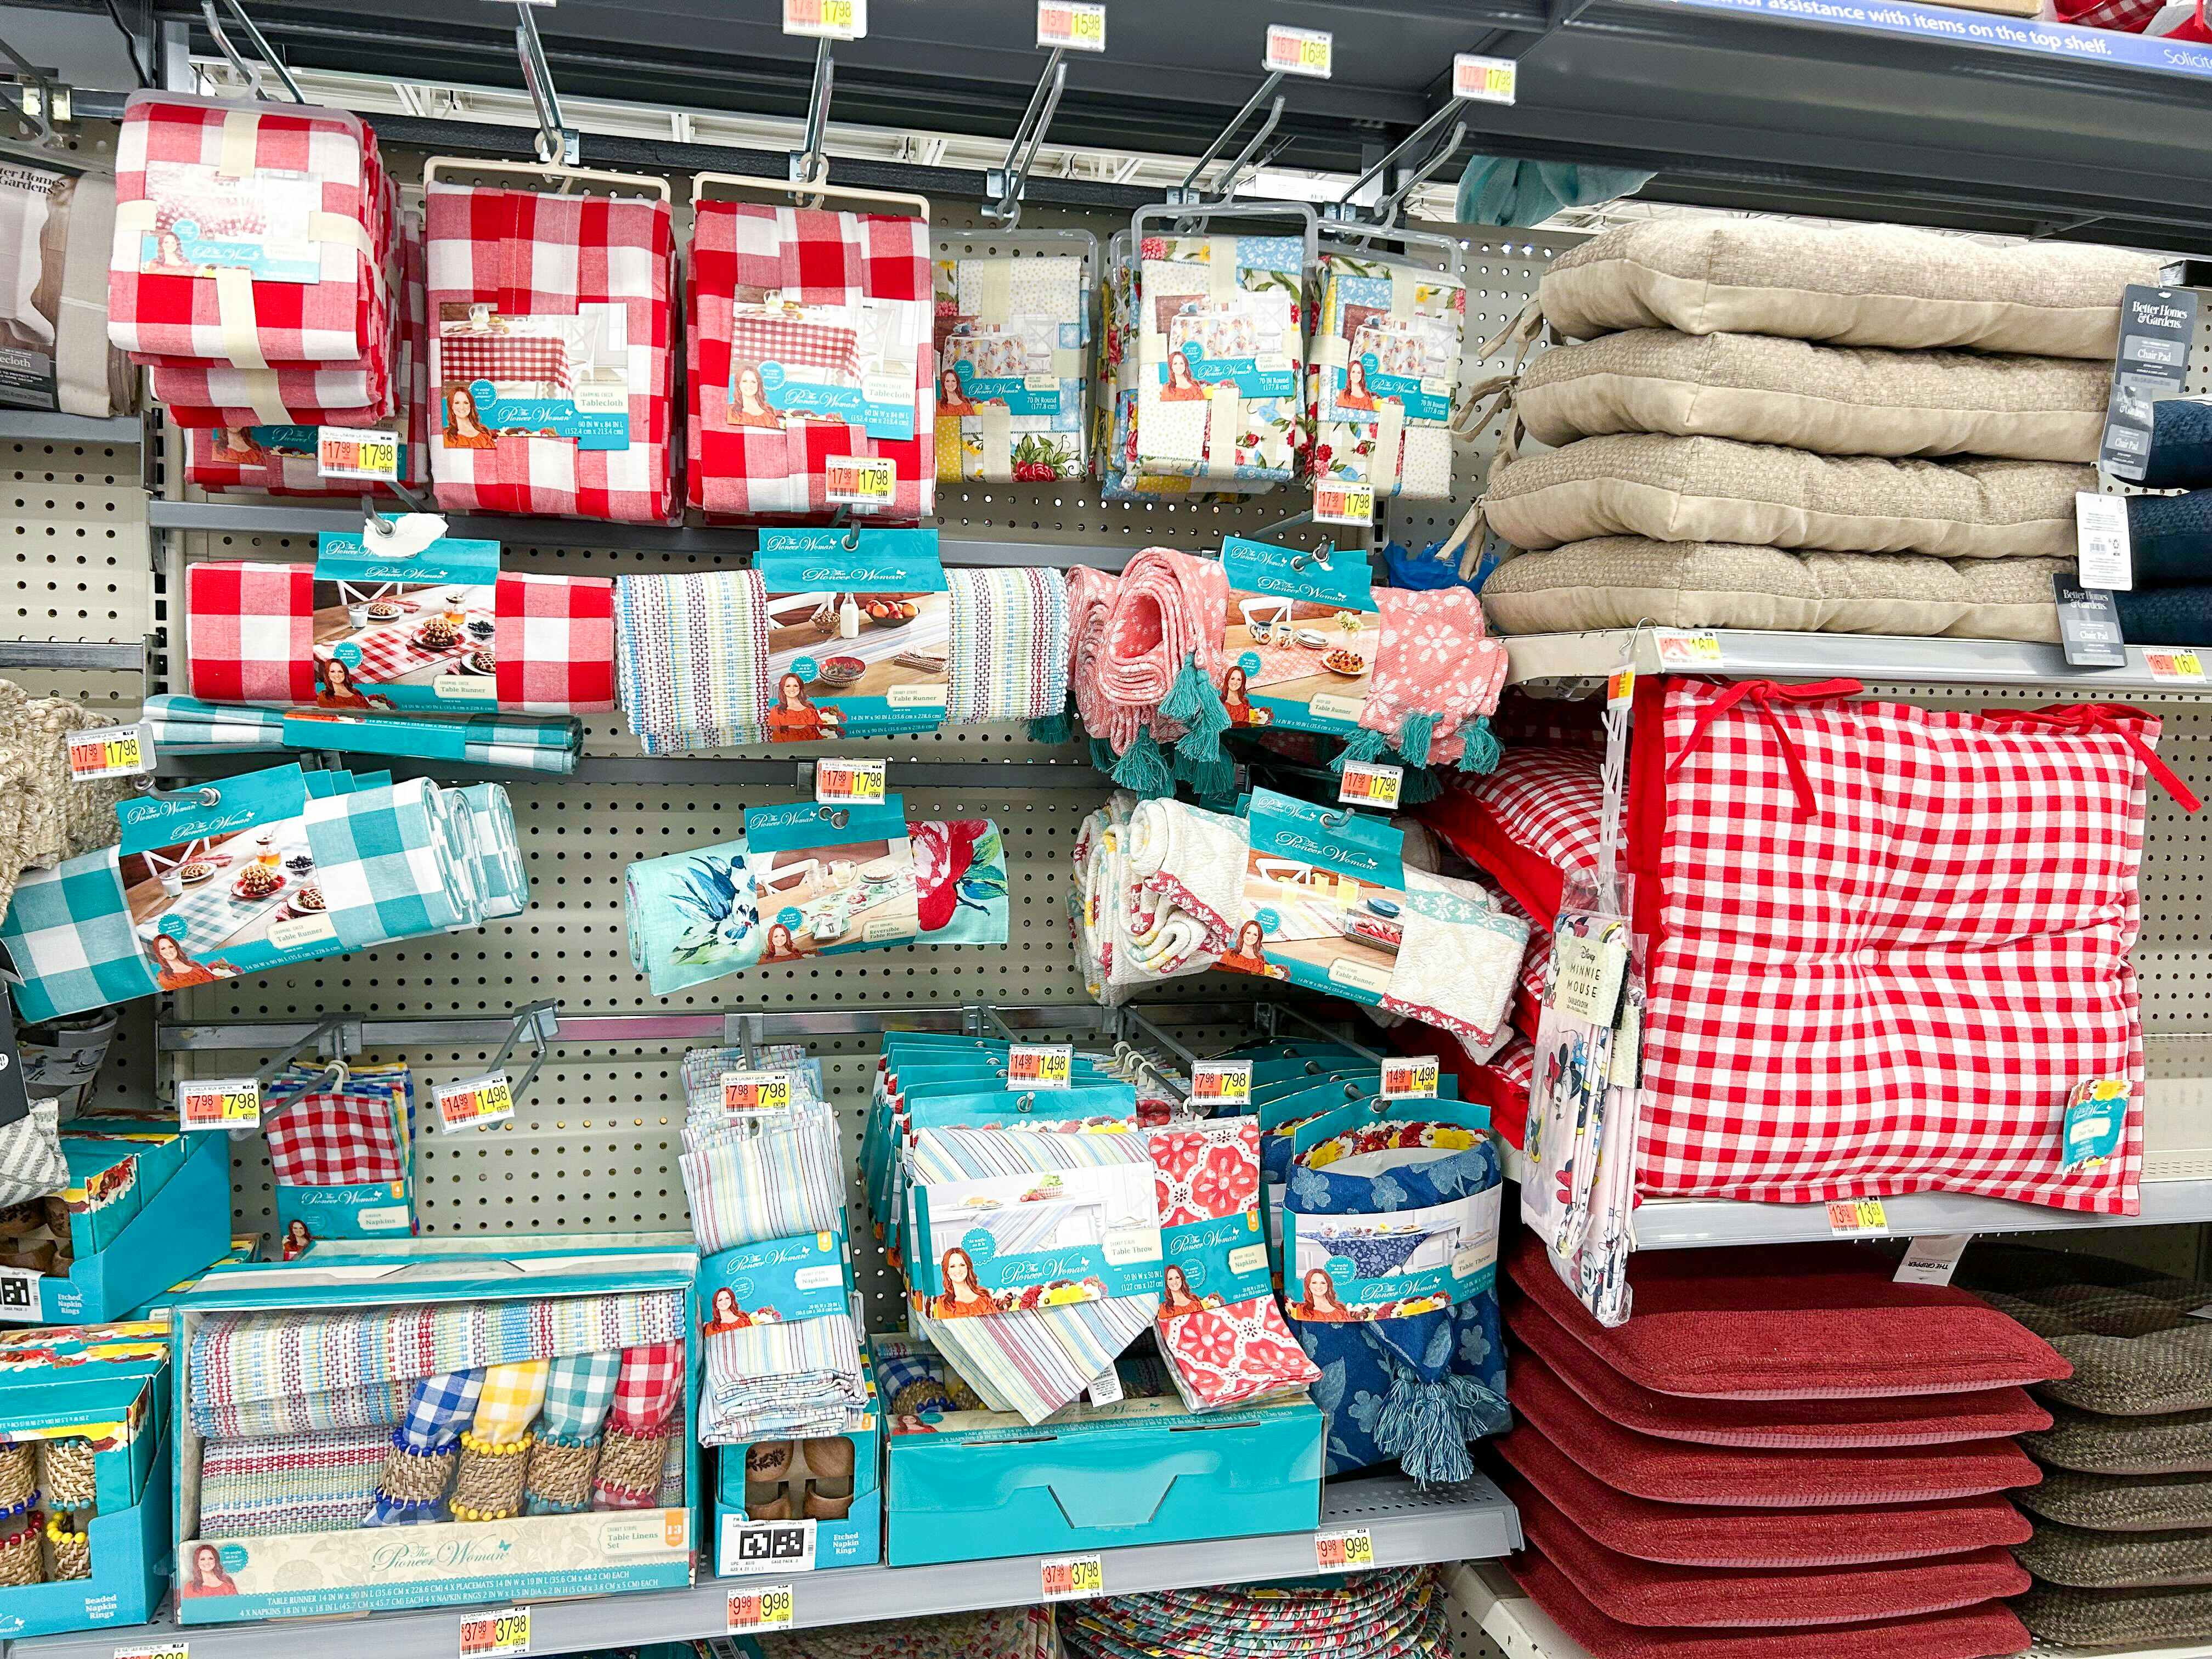 A walmart shelf filled with The Pioneer Woman kitchen and home items, including dish towels, chair cushions, and more